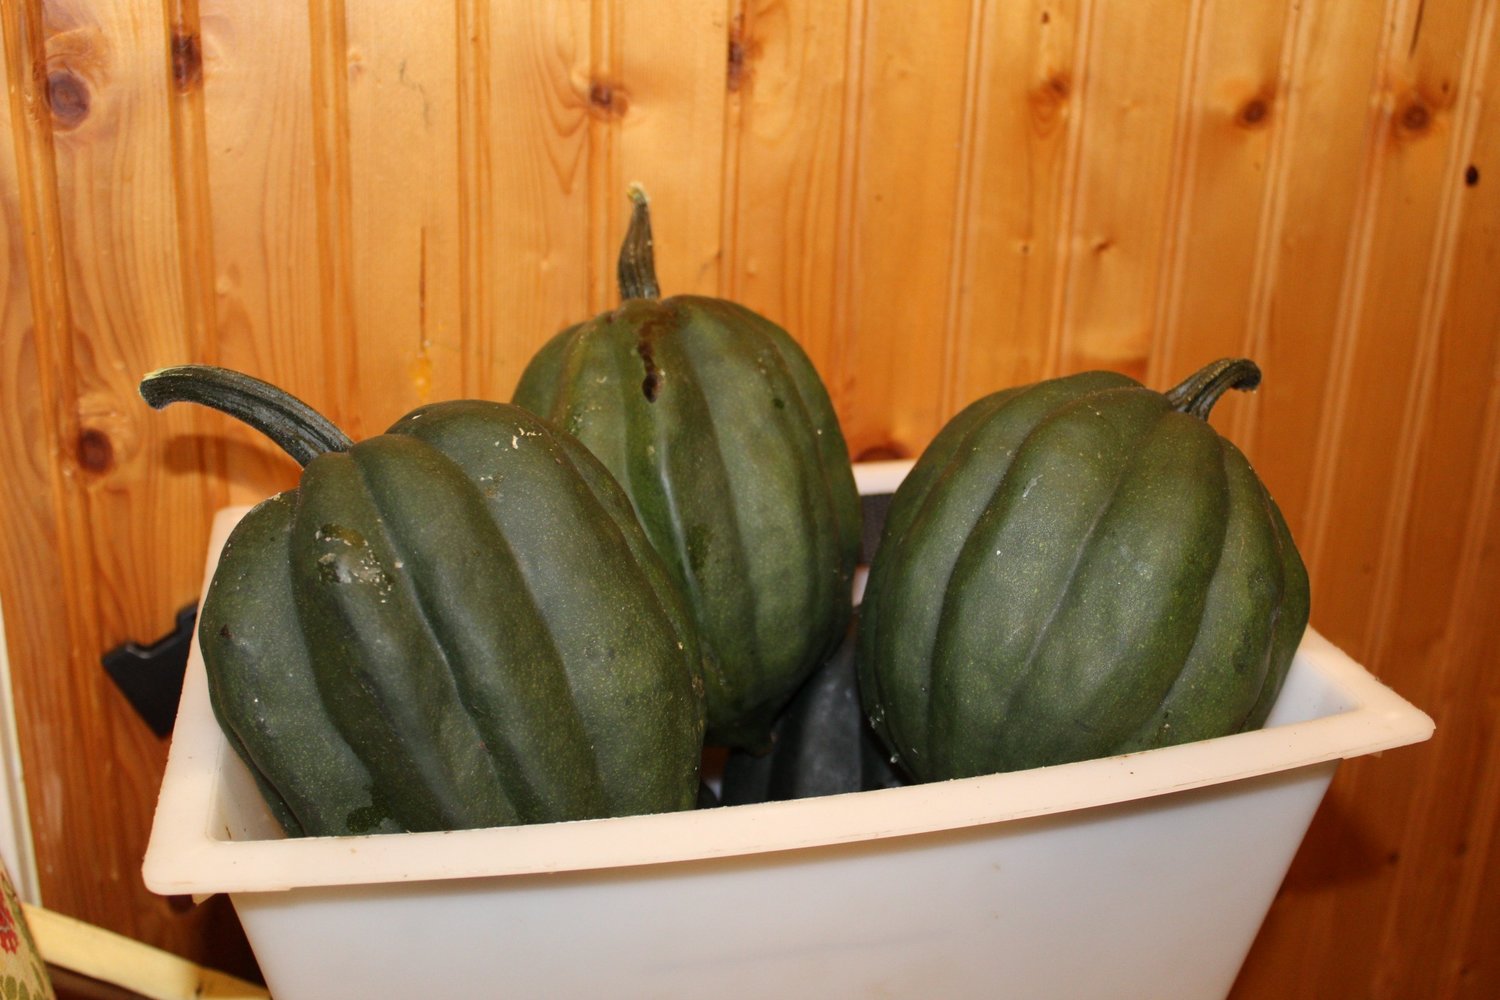 Acorn squash freshly picked from the garden.